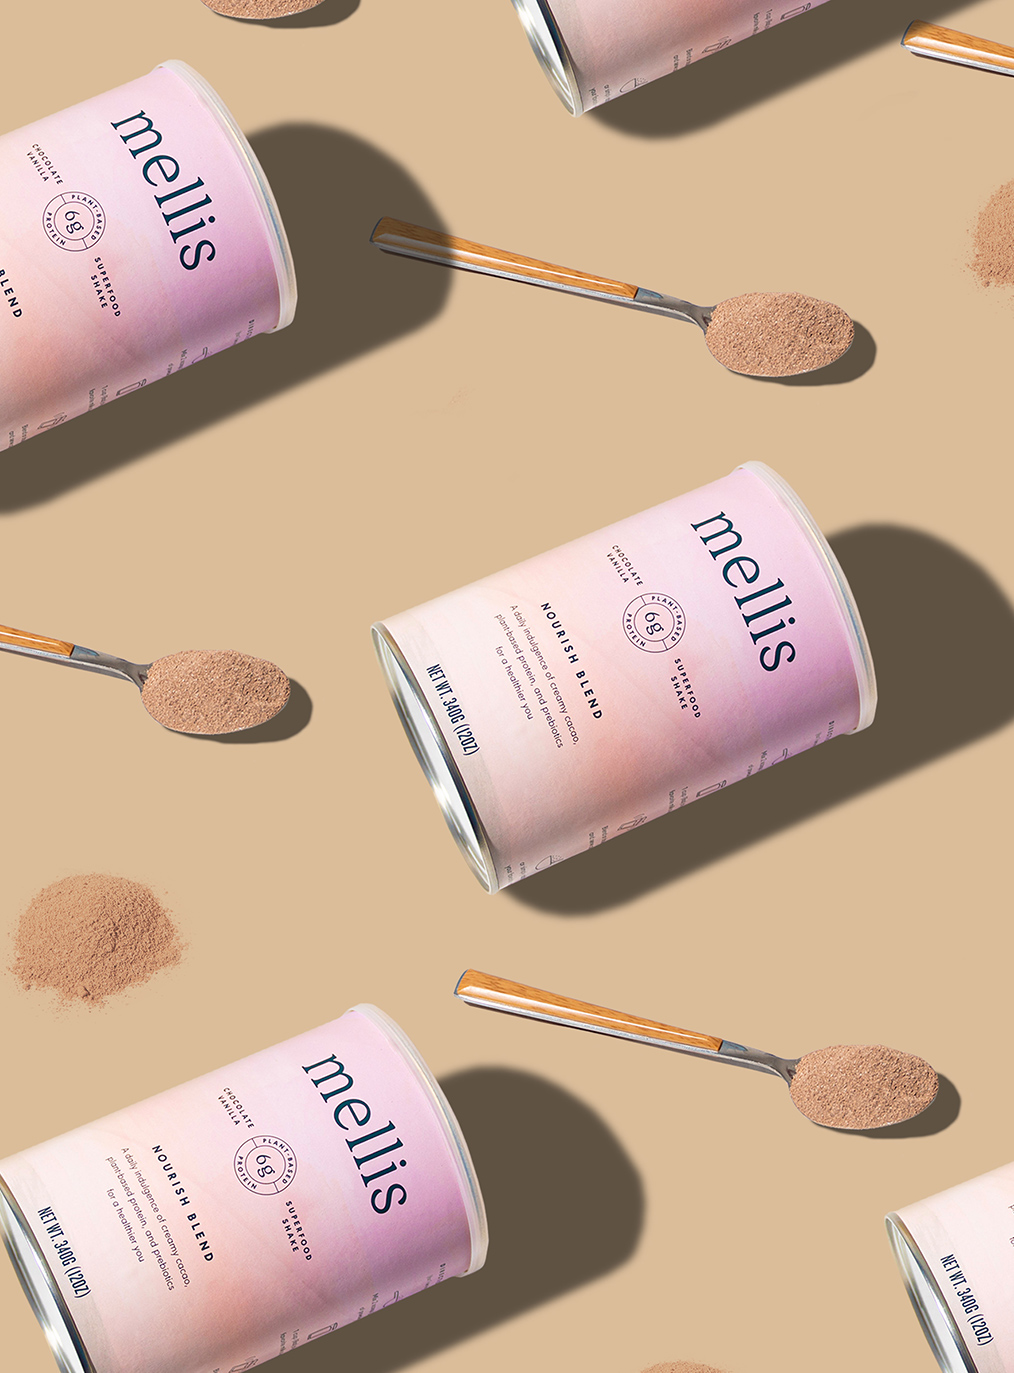 Mellis Superfood Shake Brand Identity and Packaging Design by Macaroni Creative